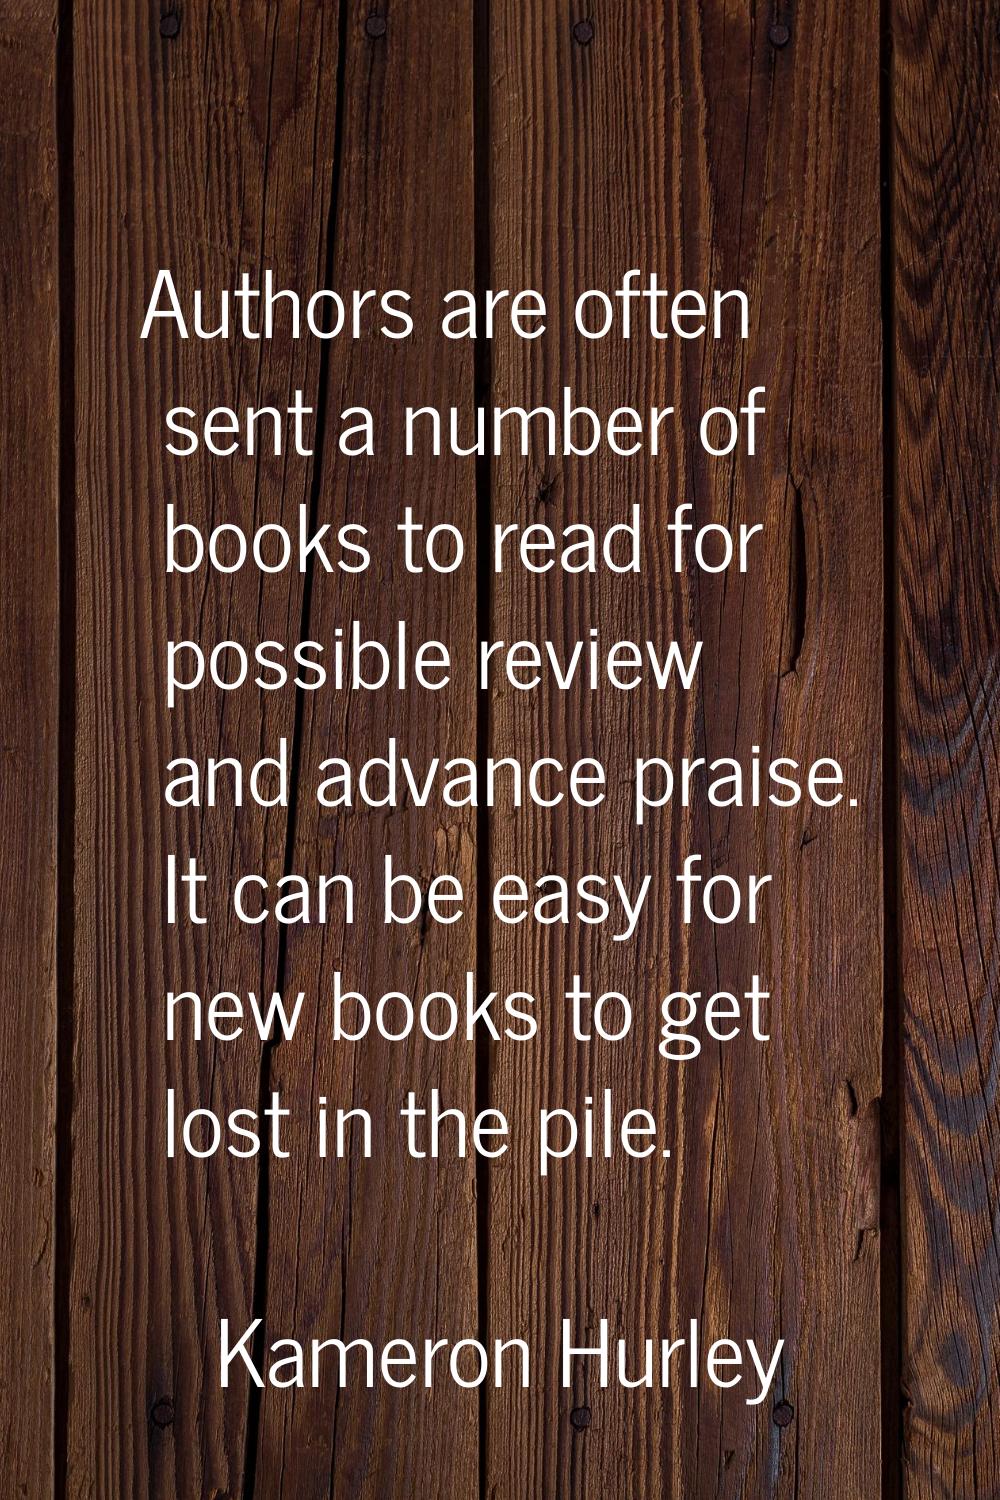 Authors are often sent a number of books to read for possible review and advance praise. It can be 